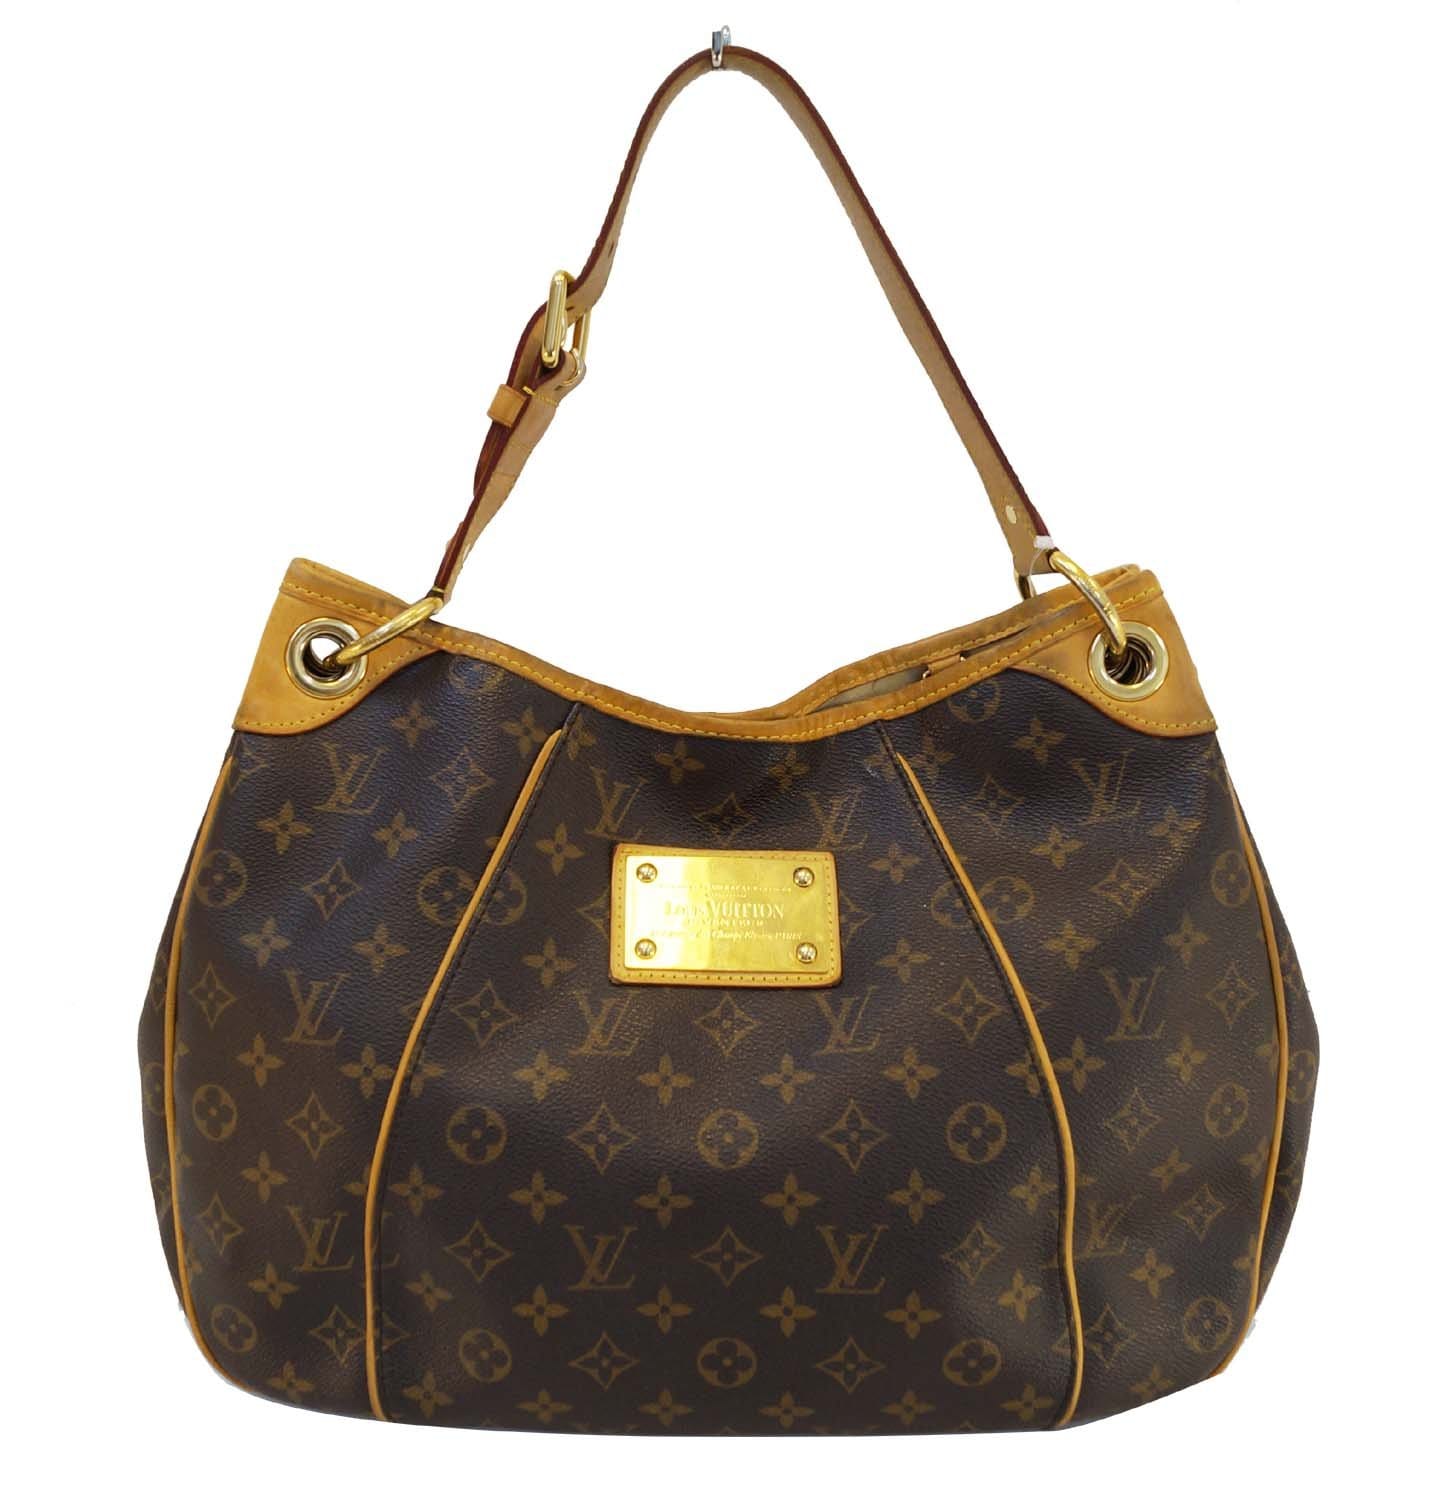 The Louis Vuitton Galliera was released in two sizes: PM and GM. The PM  pictured above measures 15 inches in length.